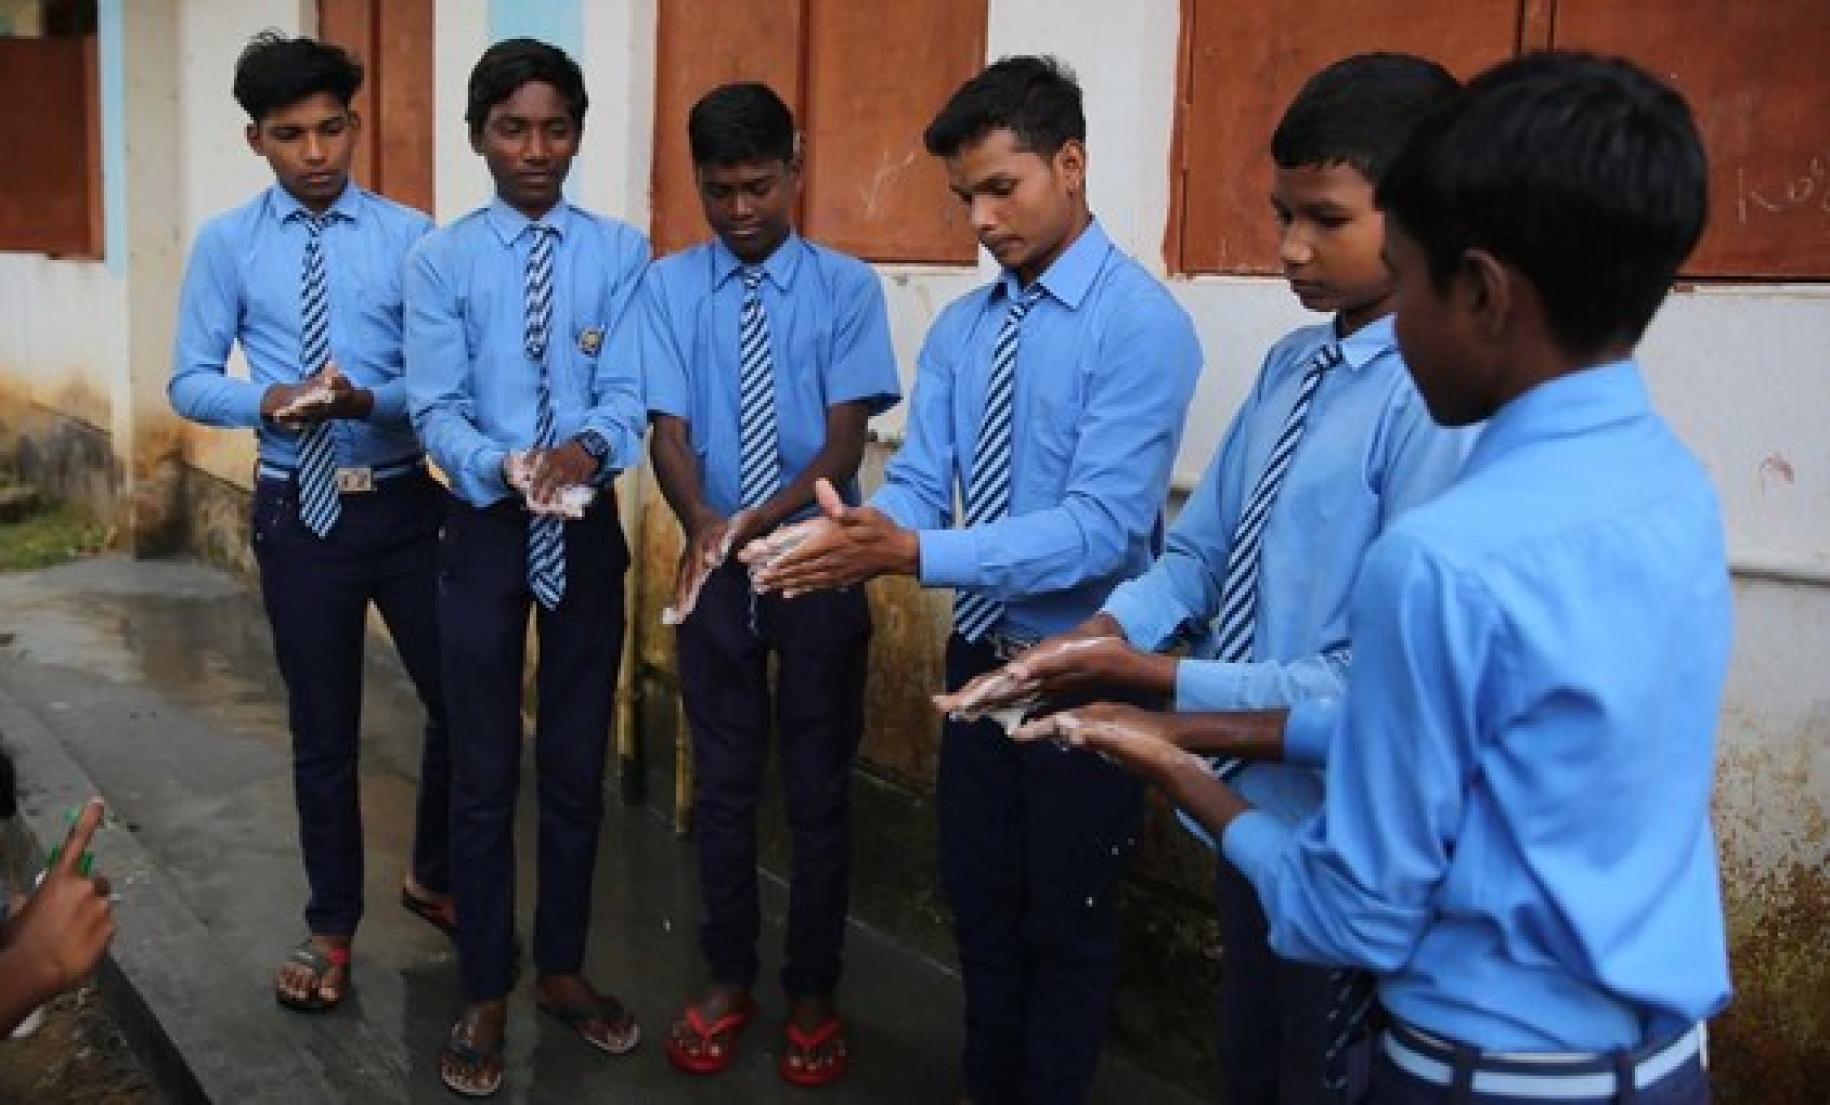 Pupils at a school in Chhattisgarh in northeastern India practice safe-hand washing techniques.